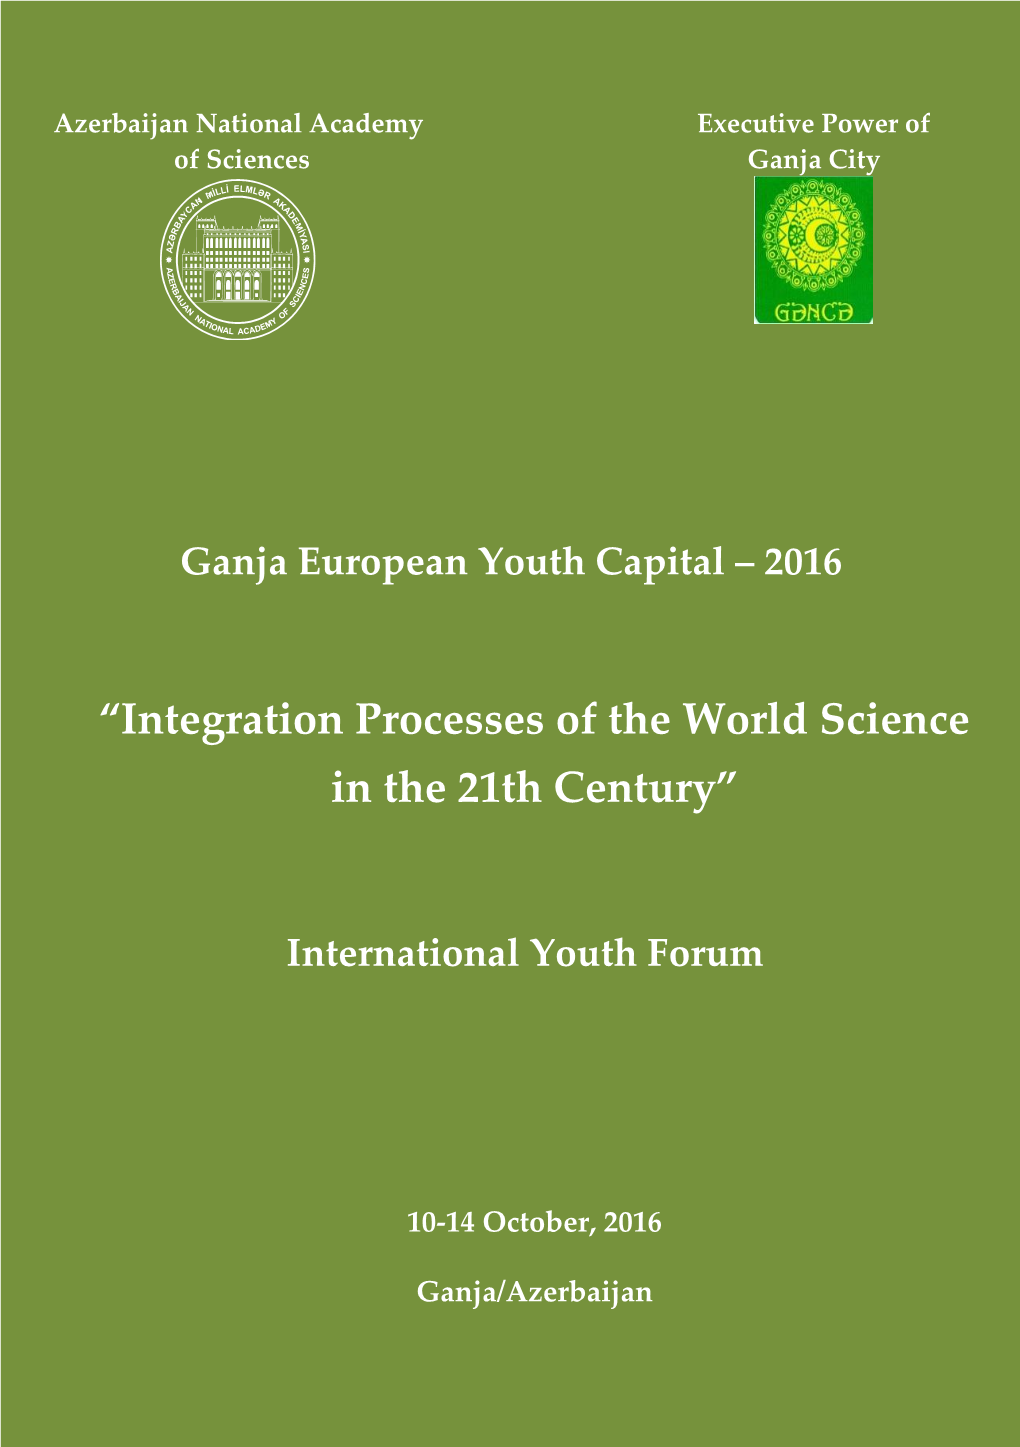 “Integration Processes of the World Science in the 21Th Century”